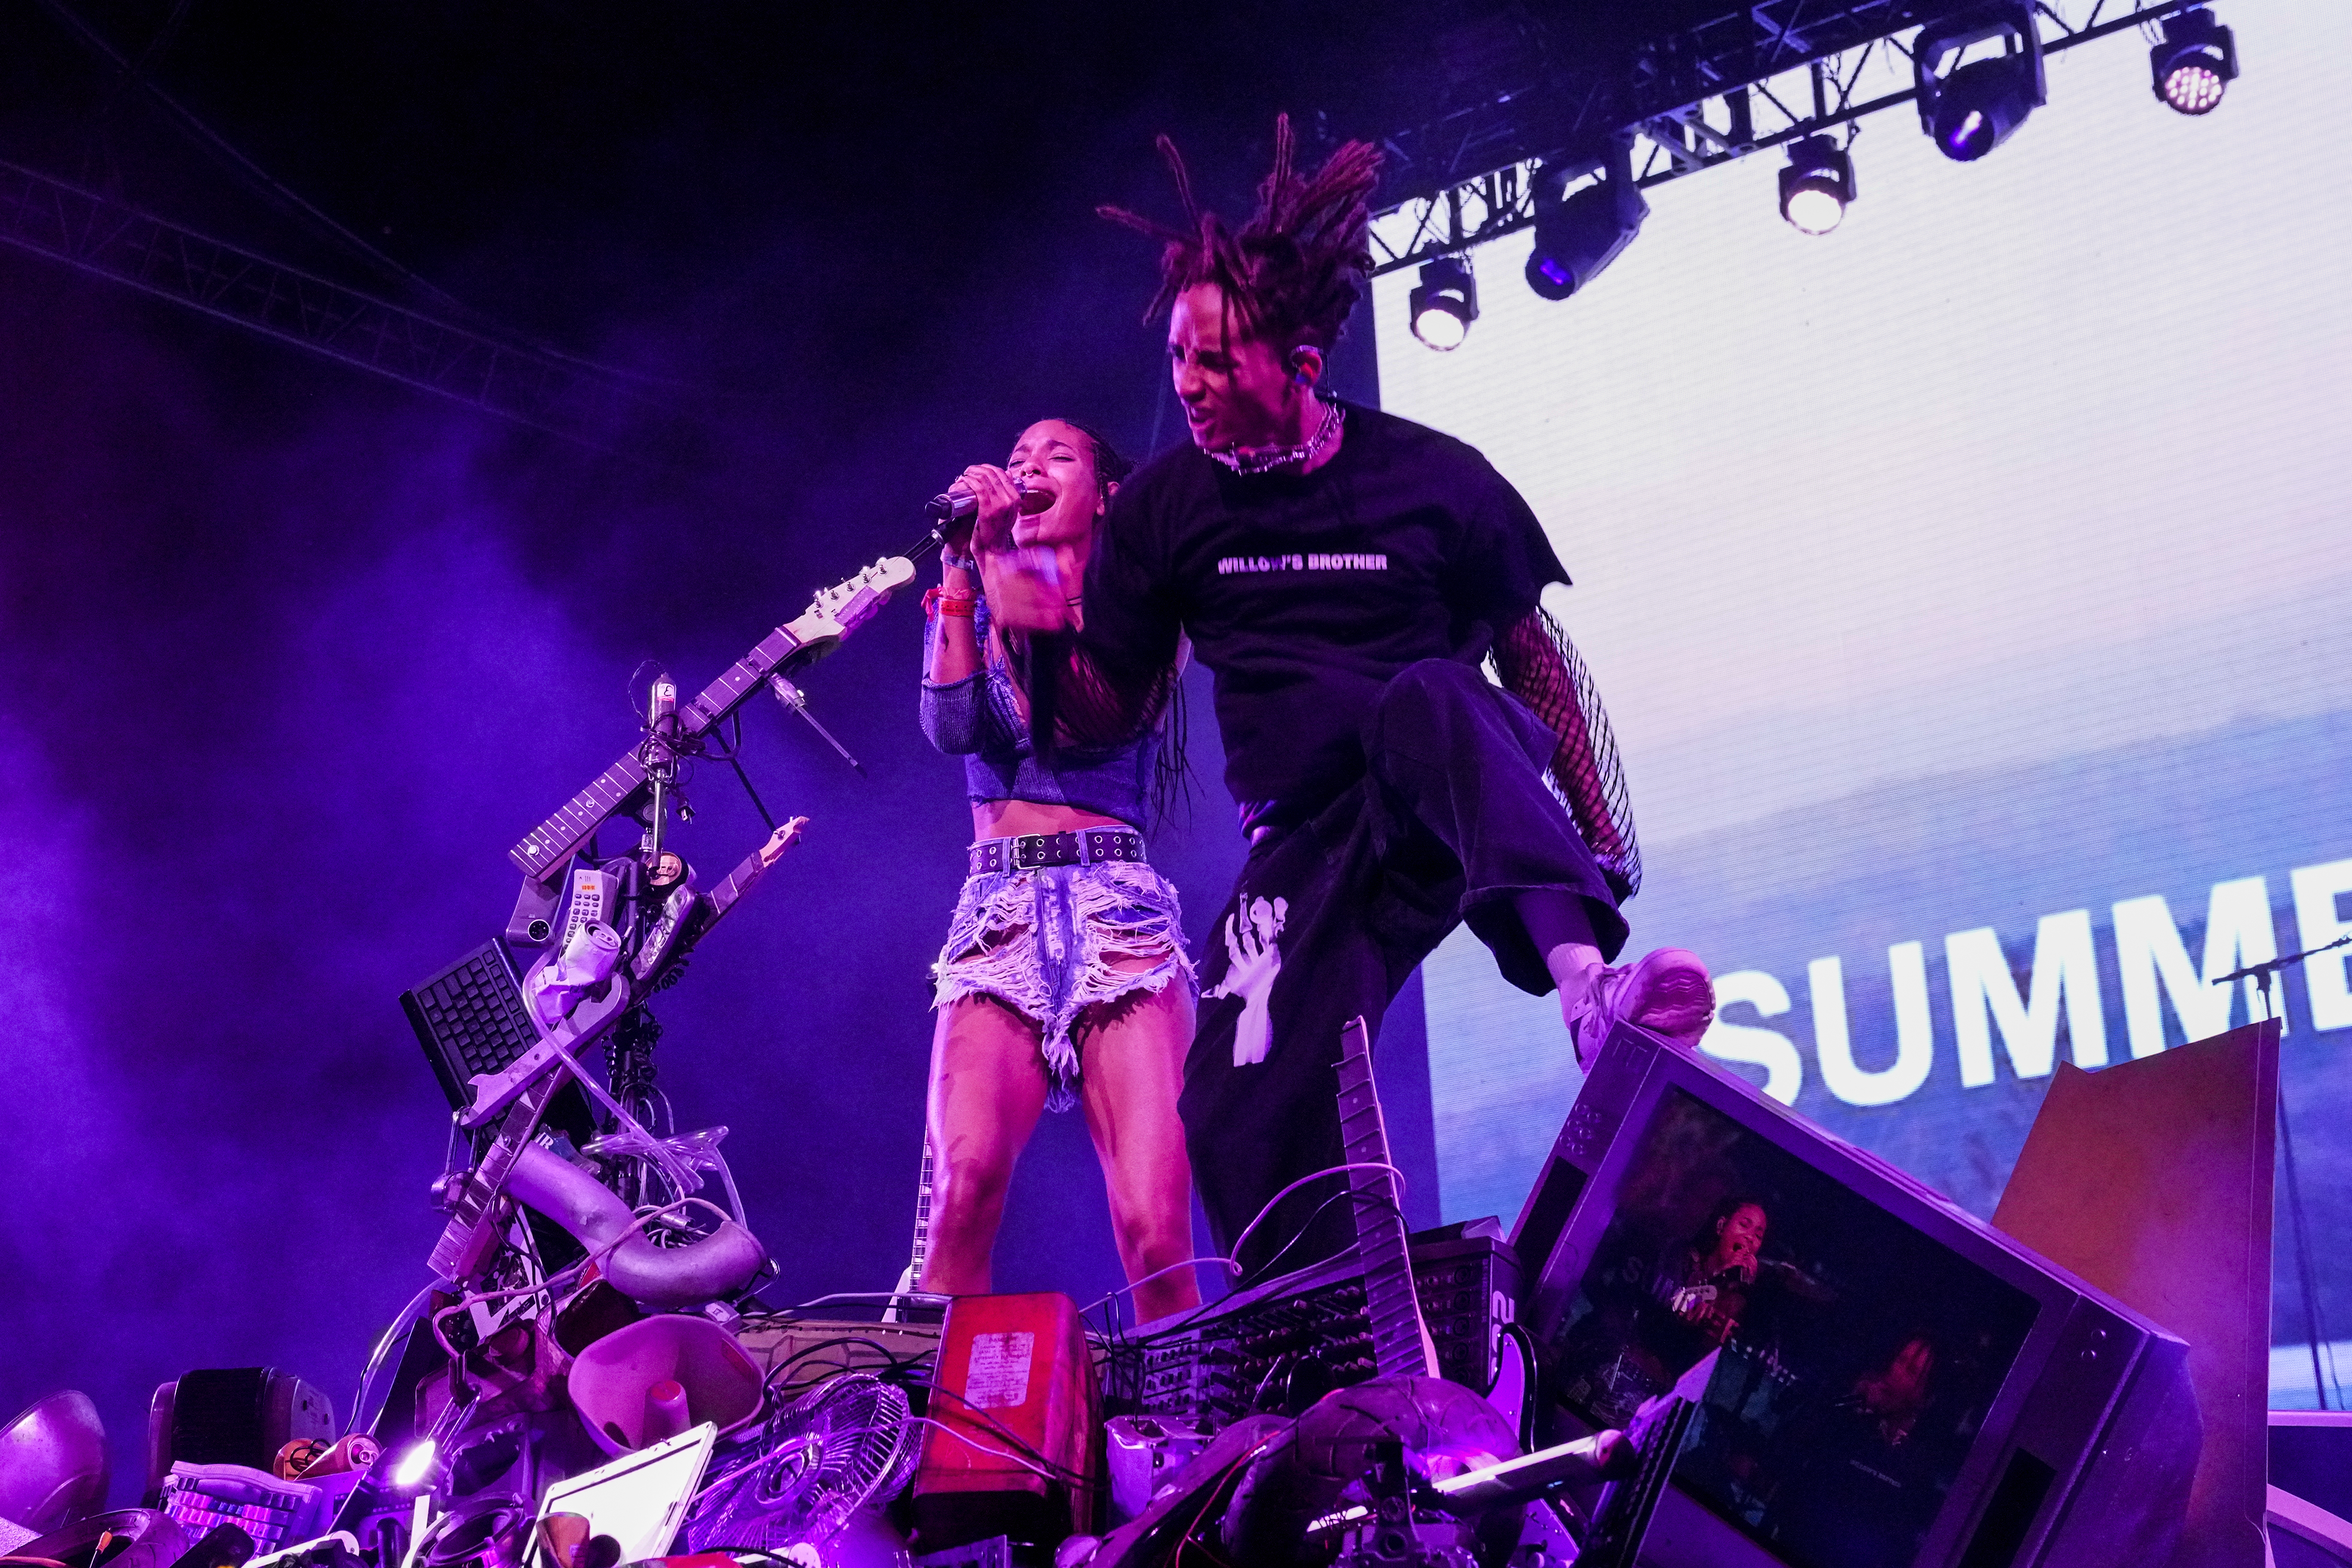 Willow Smith and Jaden Smith perform onstage at the 2023 Coachella Valley Music and Arts Festival on April 23, 2023, in Indio, California. | Source: Getty Images